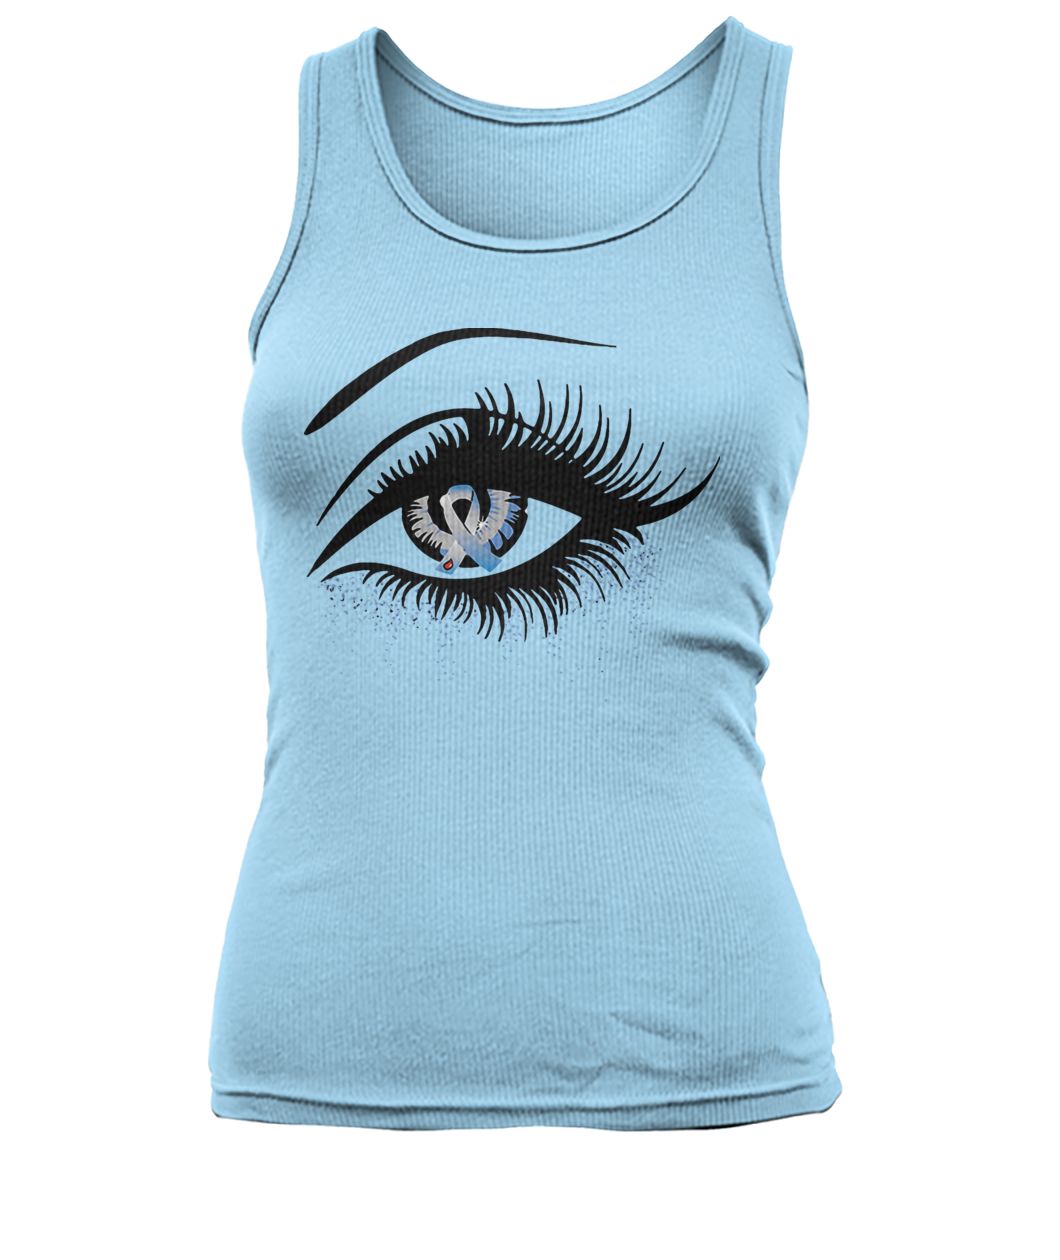 Diabetes and cancer awareness in the eye women's tank top